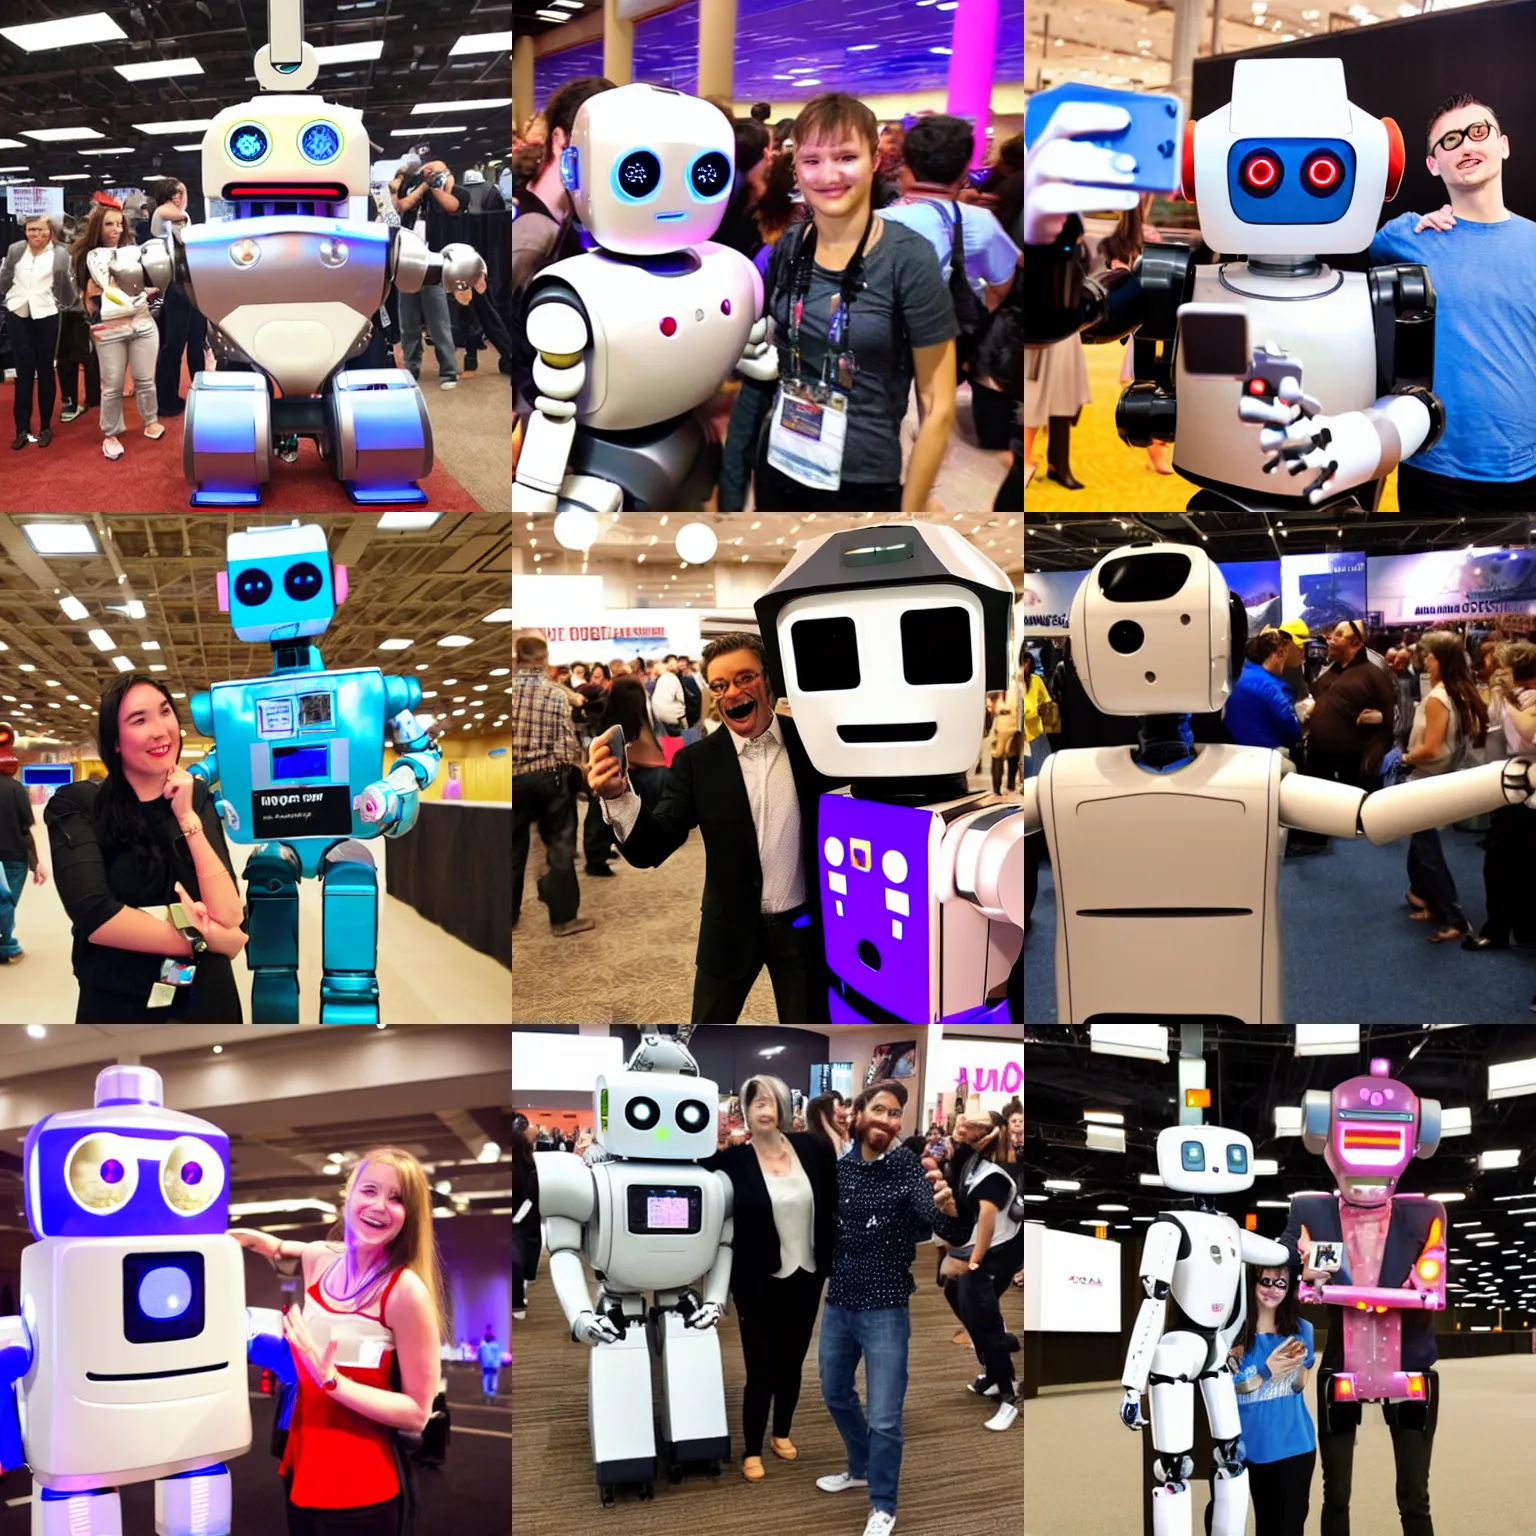 Prompt: <robot attention-grabbing wants=hug expression='give hug now' location='las vegas convention center'>selfie with an absurd insane robot</robot>